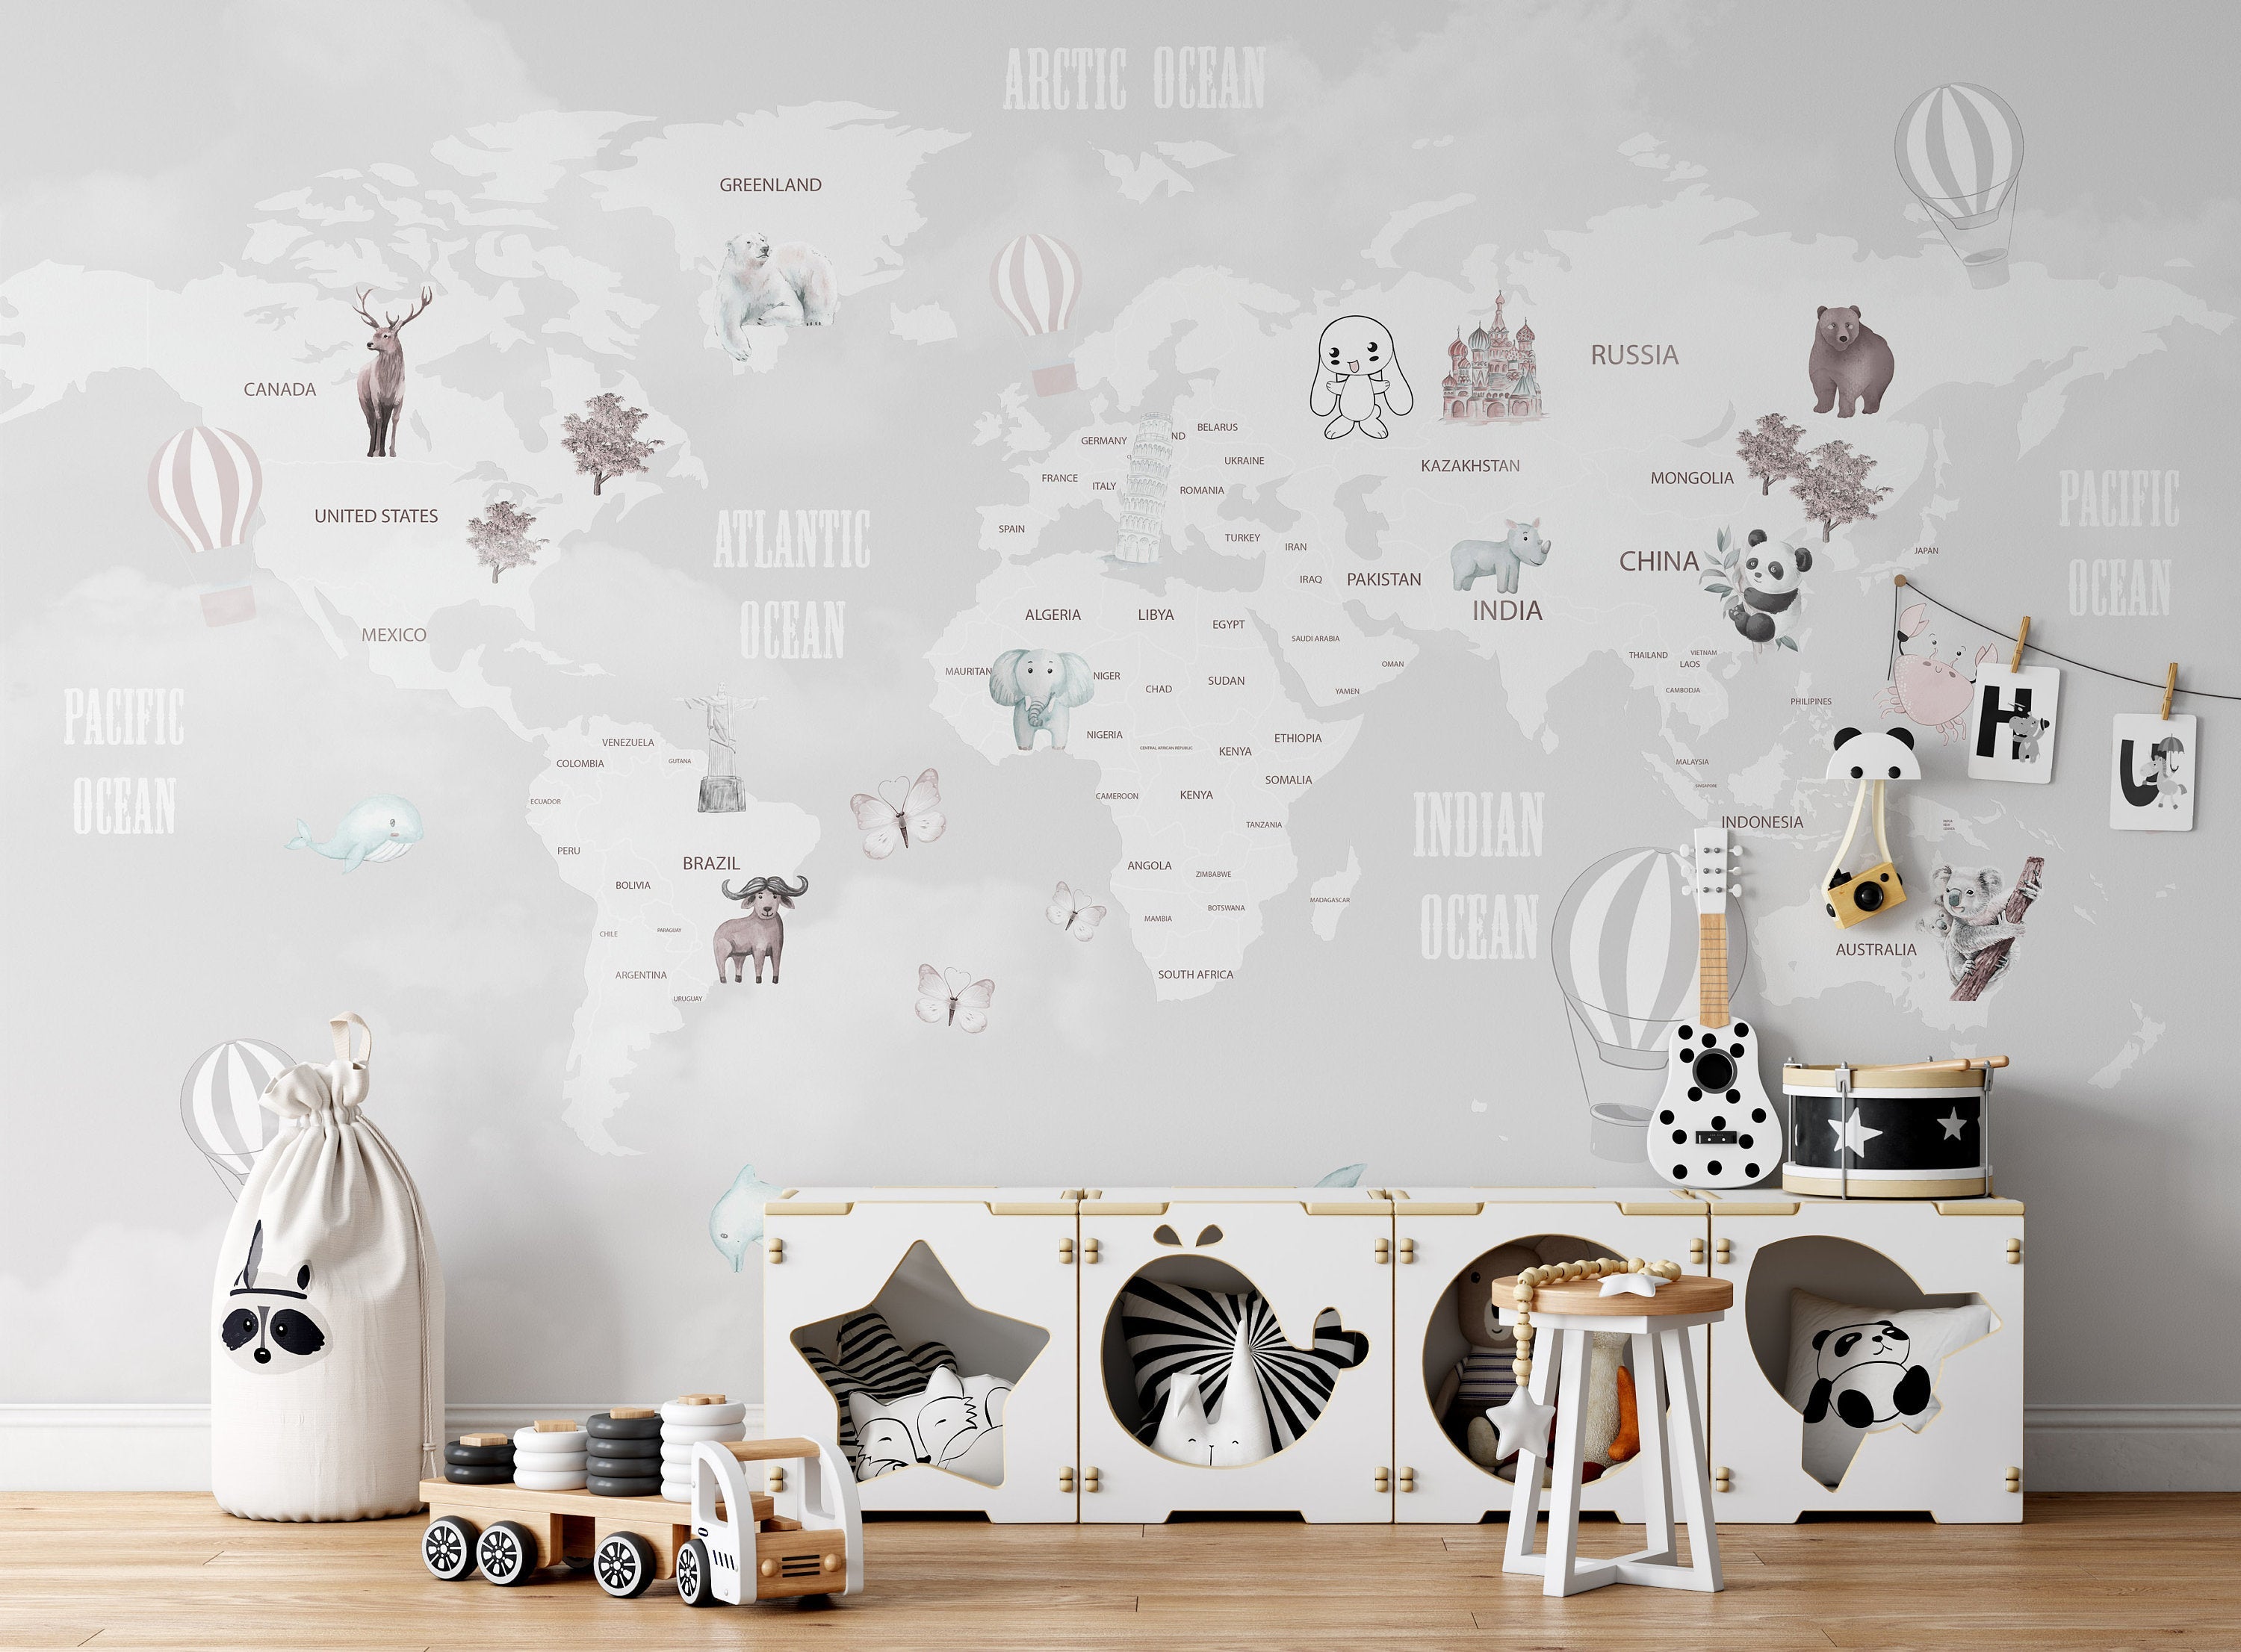 Ocean and Country Names Air Balloons Baby Animals World Map Wallpaper Self Adhesive Peel and Stick Wall Sticker Wall Decoration Removable